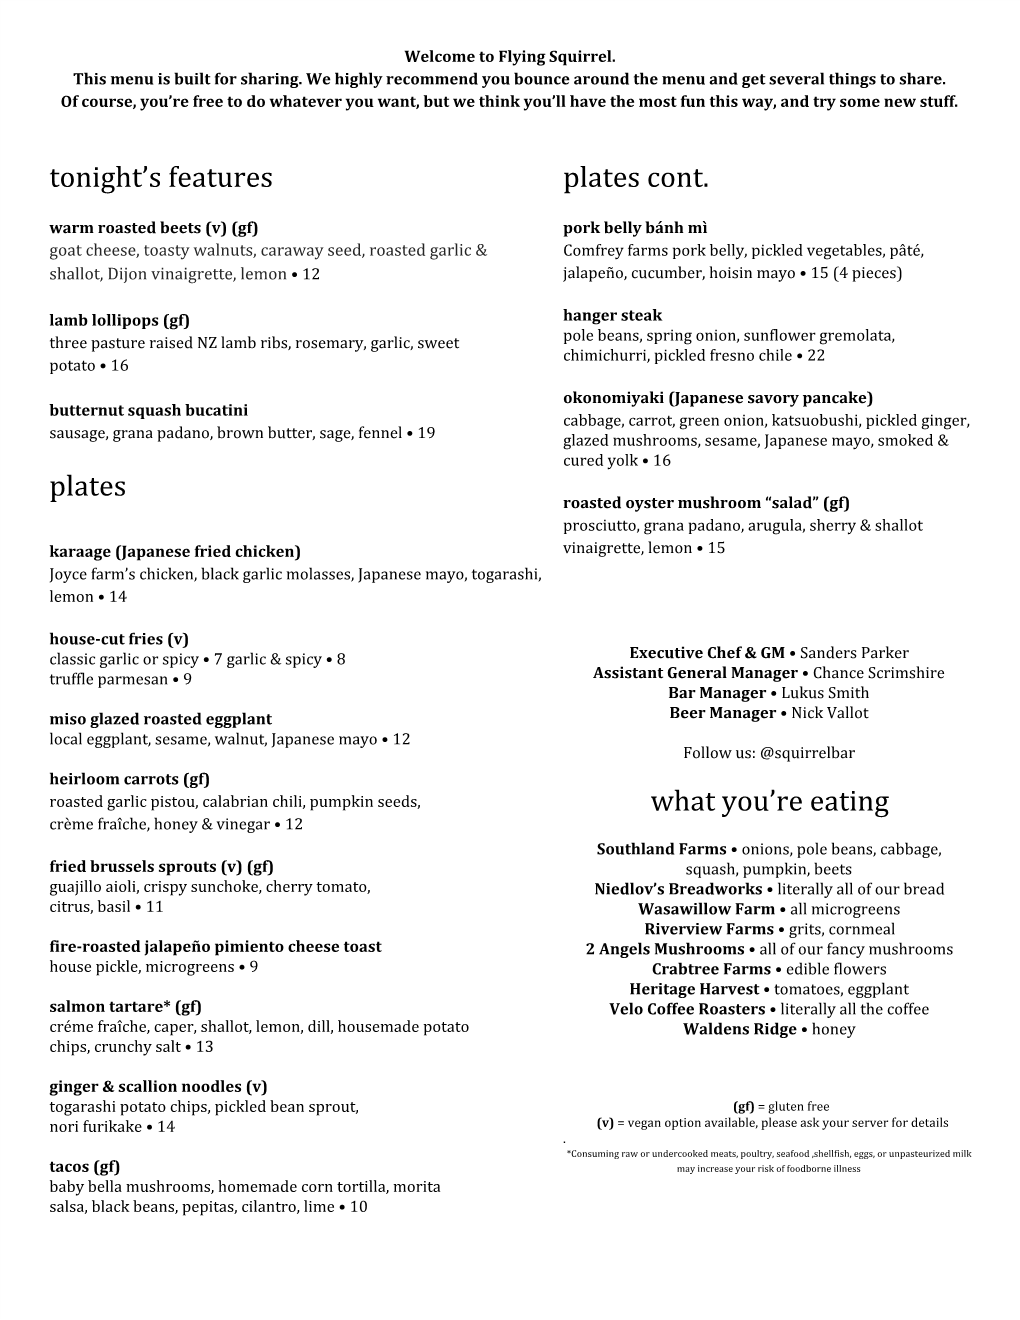 Tonight's Features Plates Plates Cont. What You're Eating